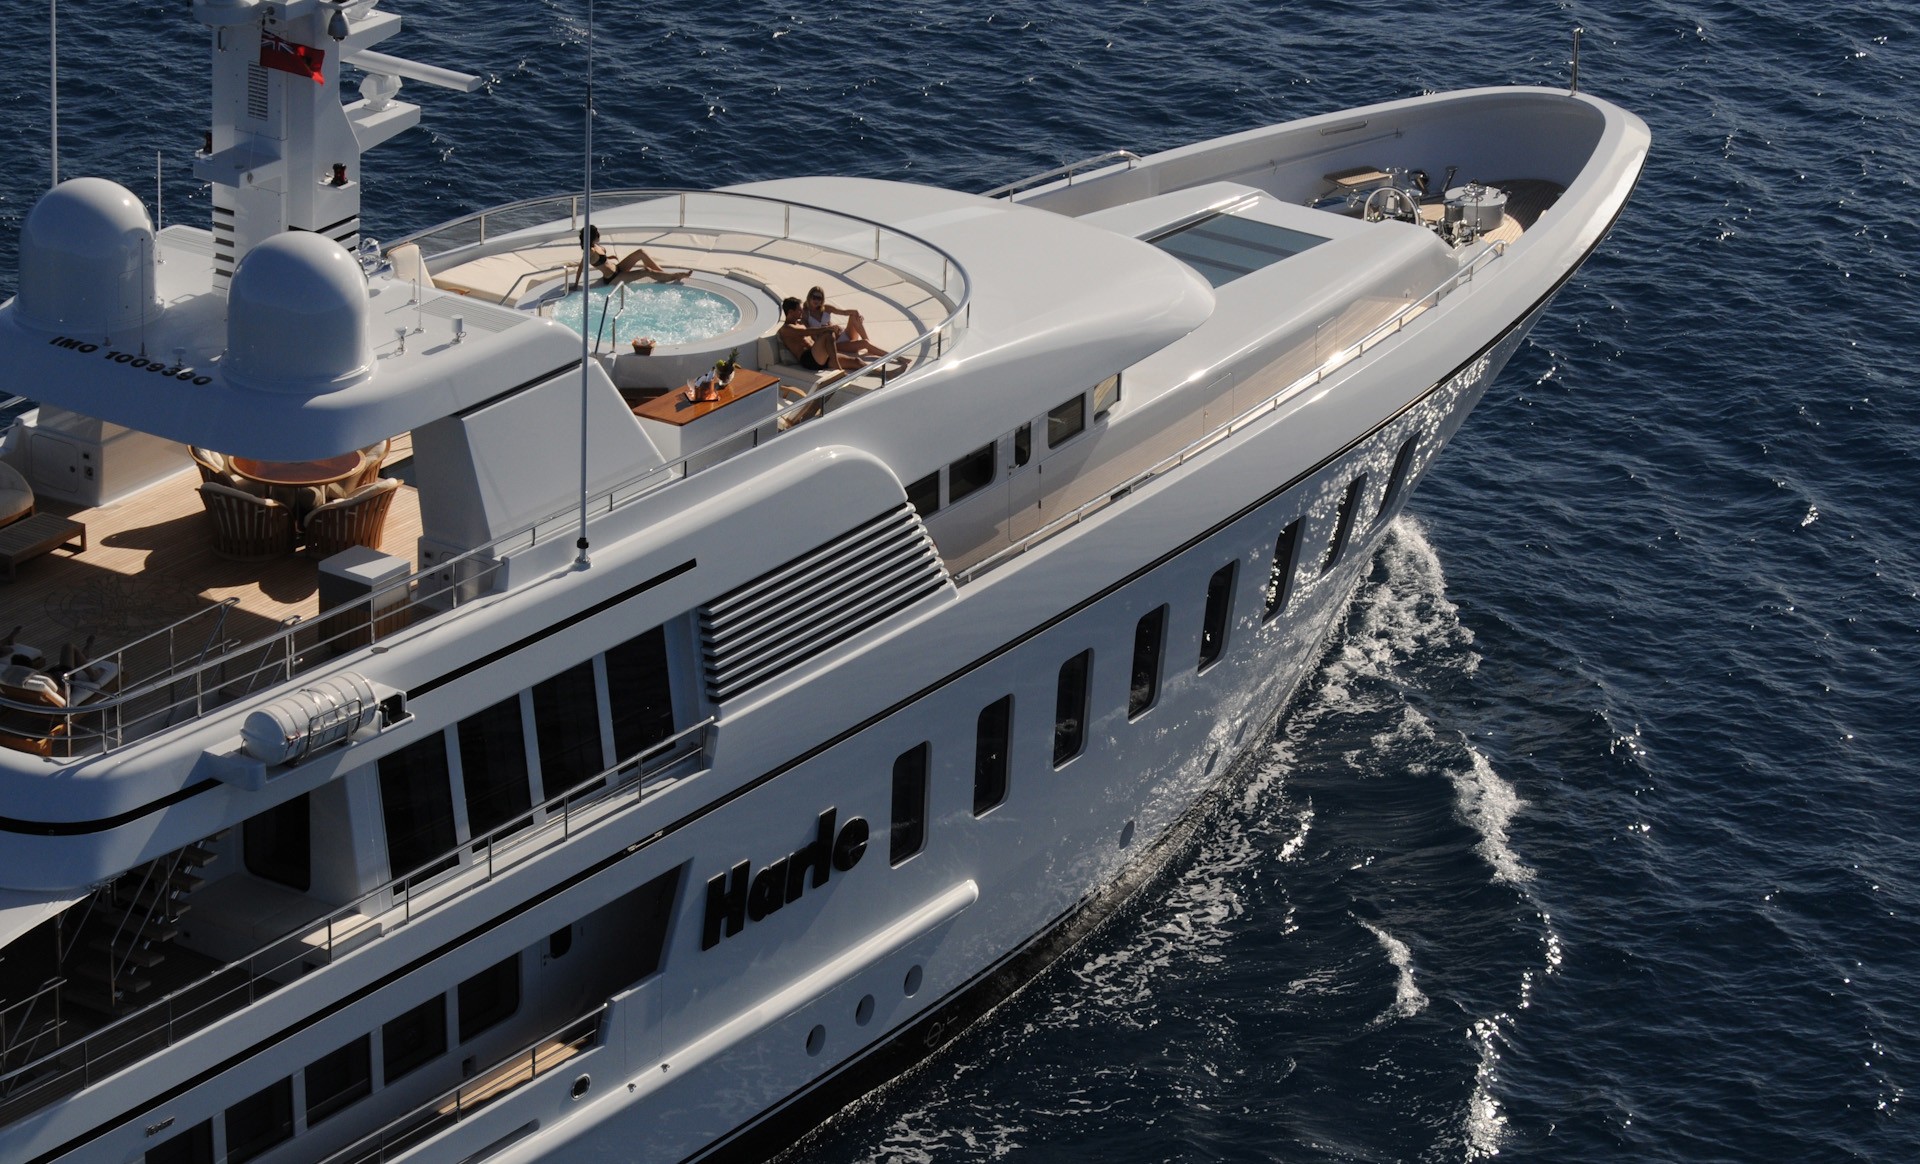 Forward: Yacht HARLE's From Above Aspect Image